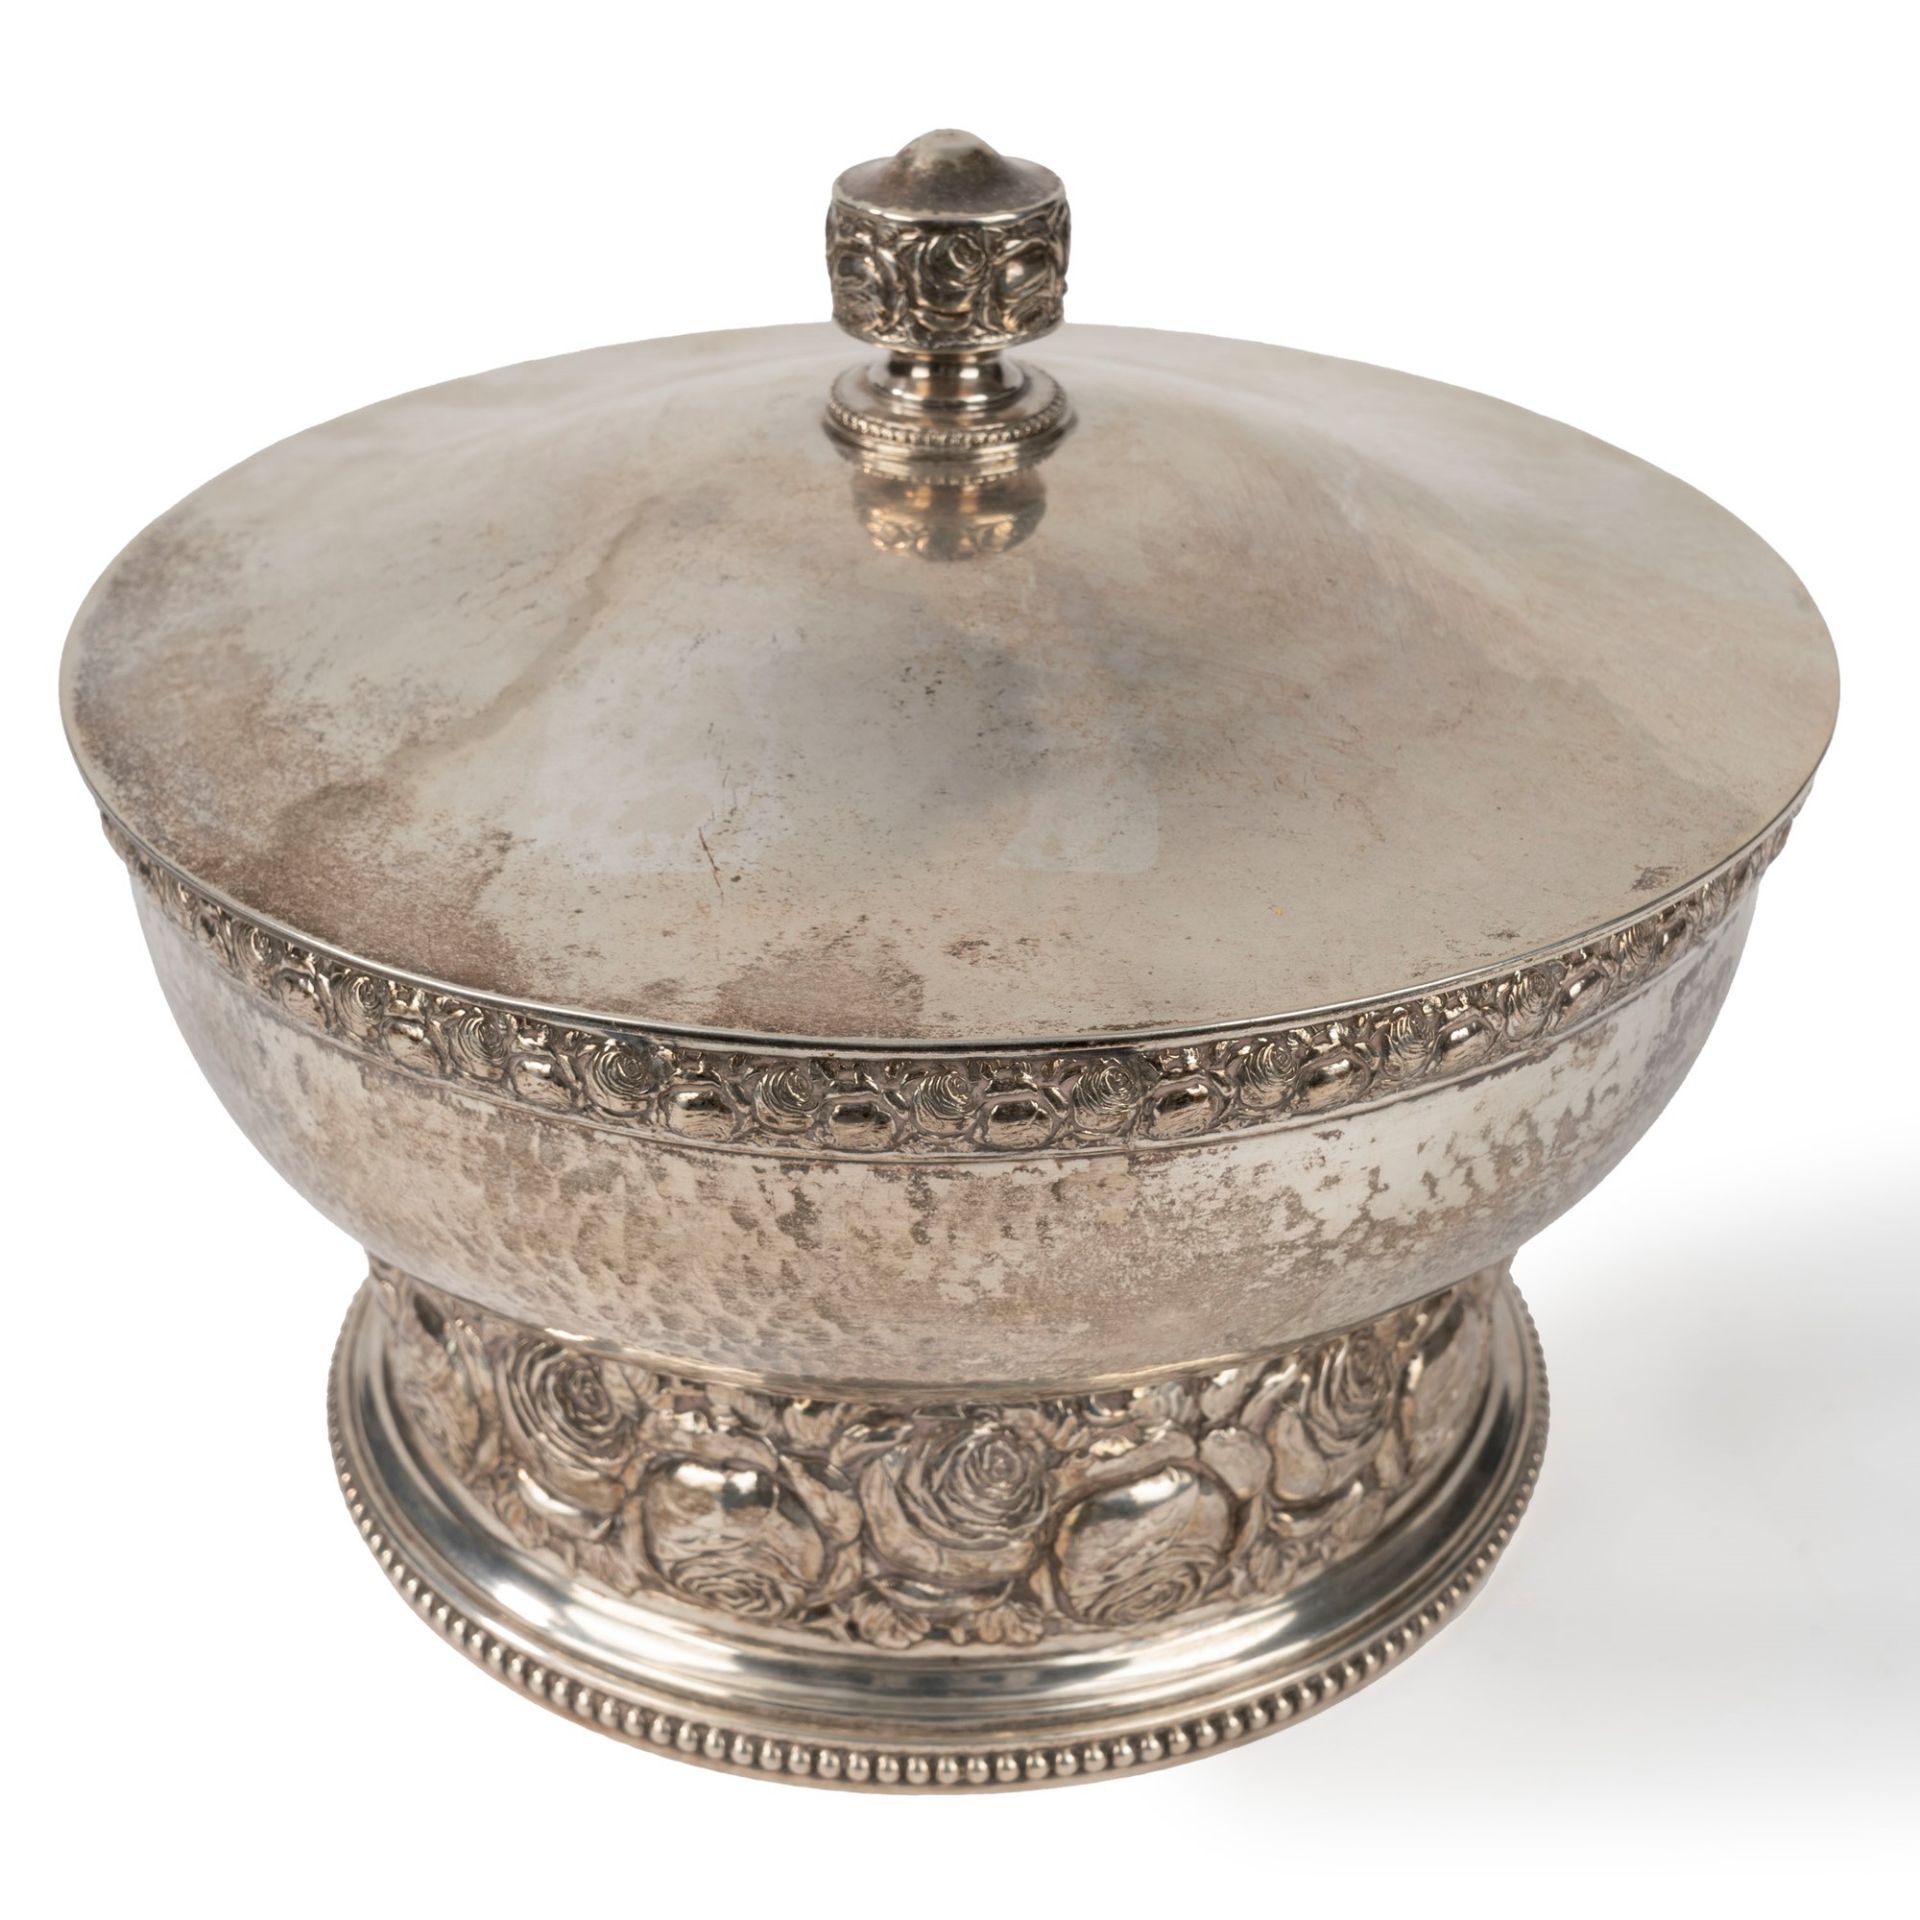 Silver stand with lid decorated with roses and leaves, Germany, early 20th century - Bild 2 aus 4